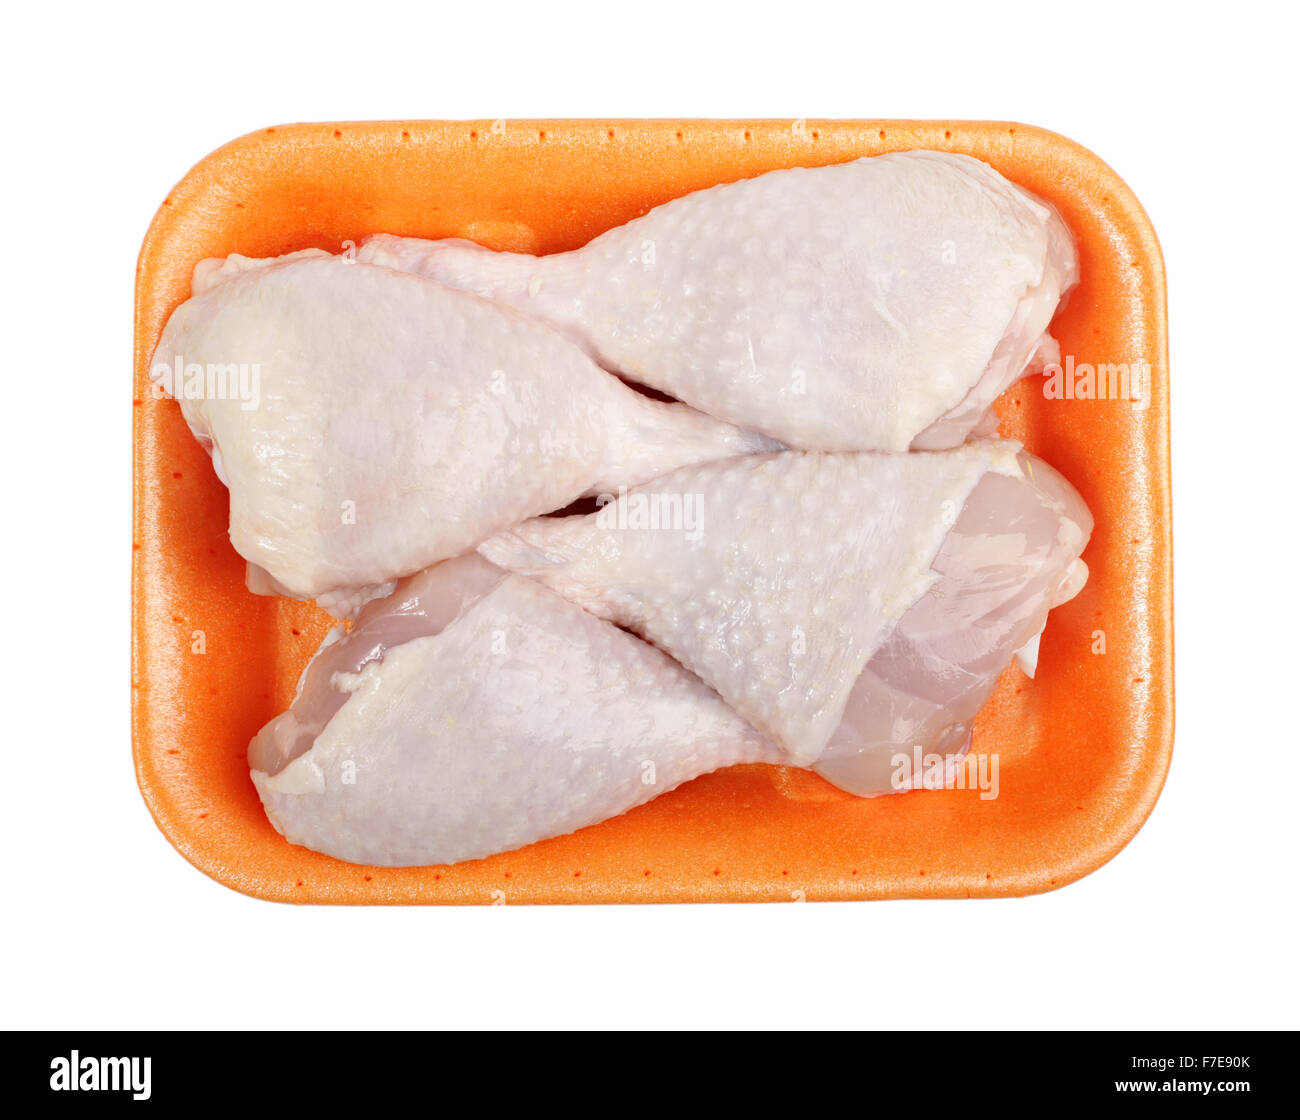 Drumstick (Chicken Leg). Isolated with clipping path. Stock Photo